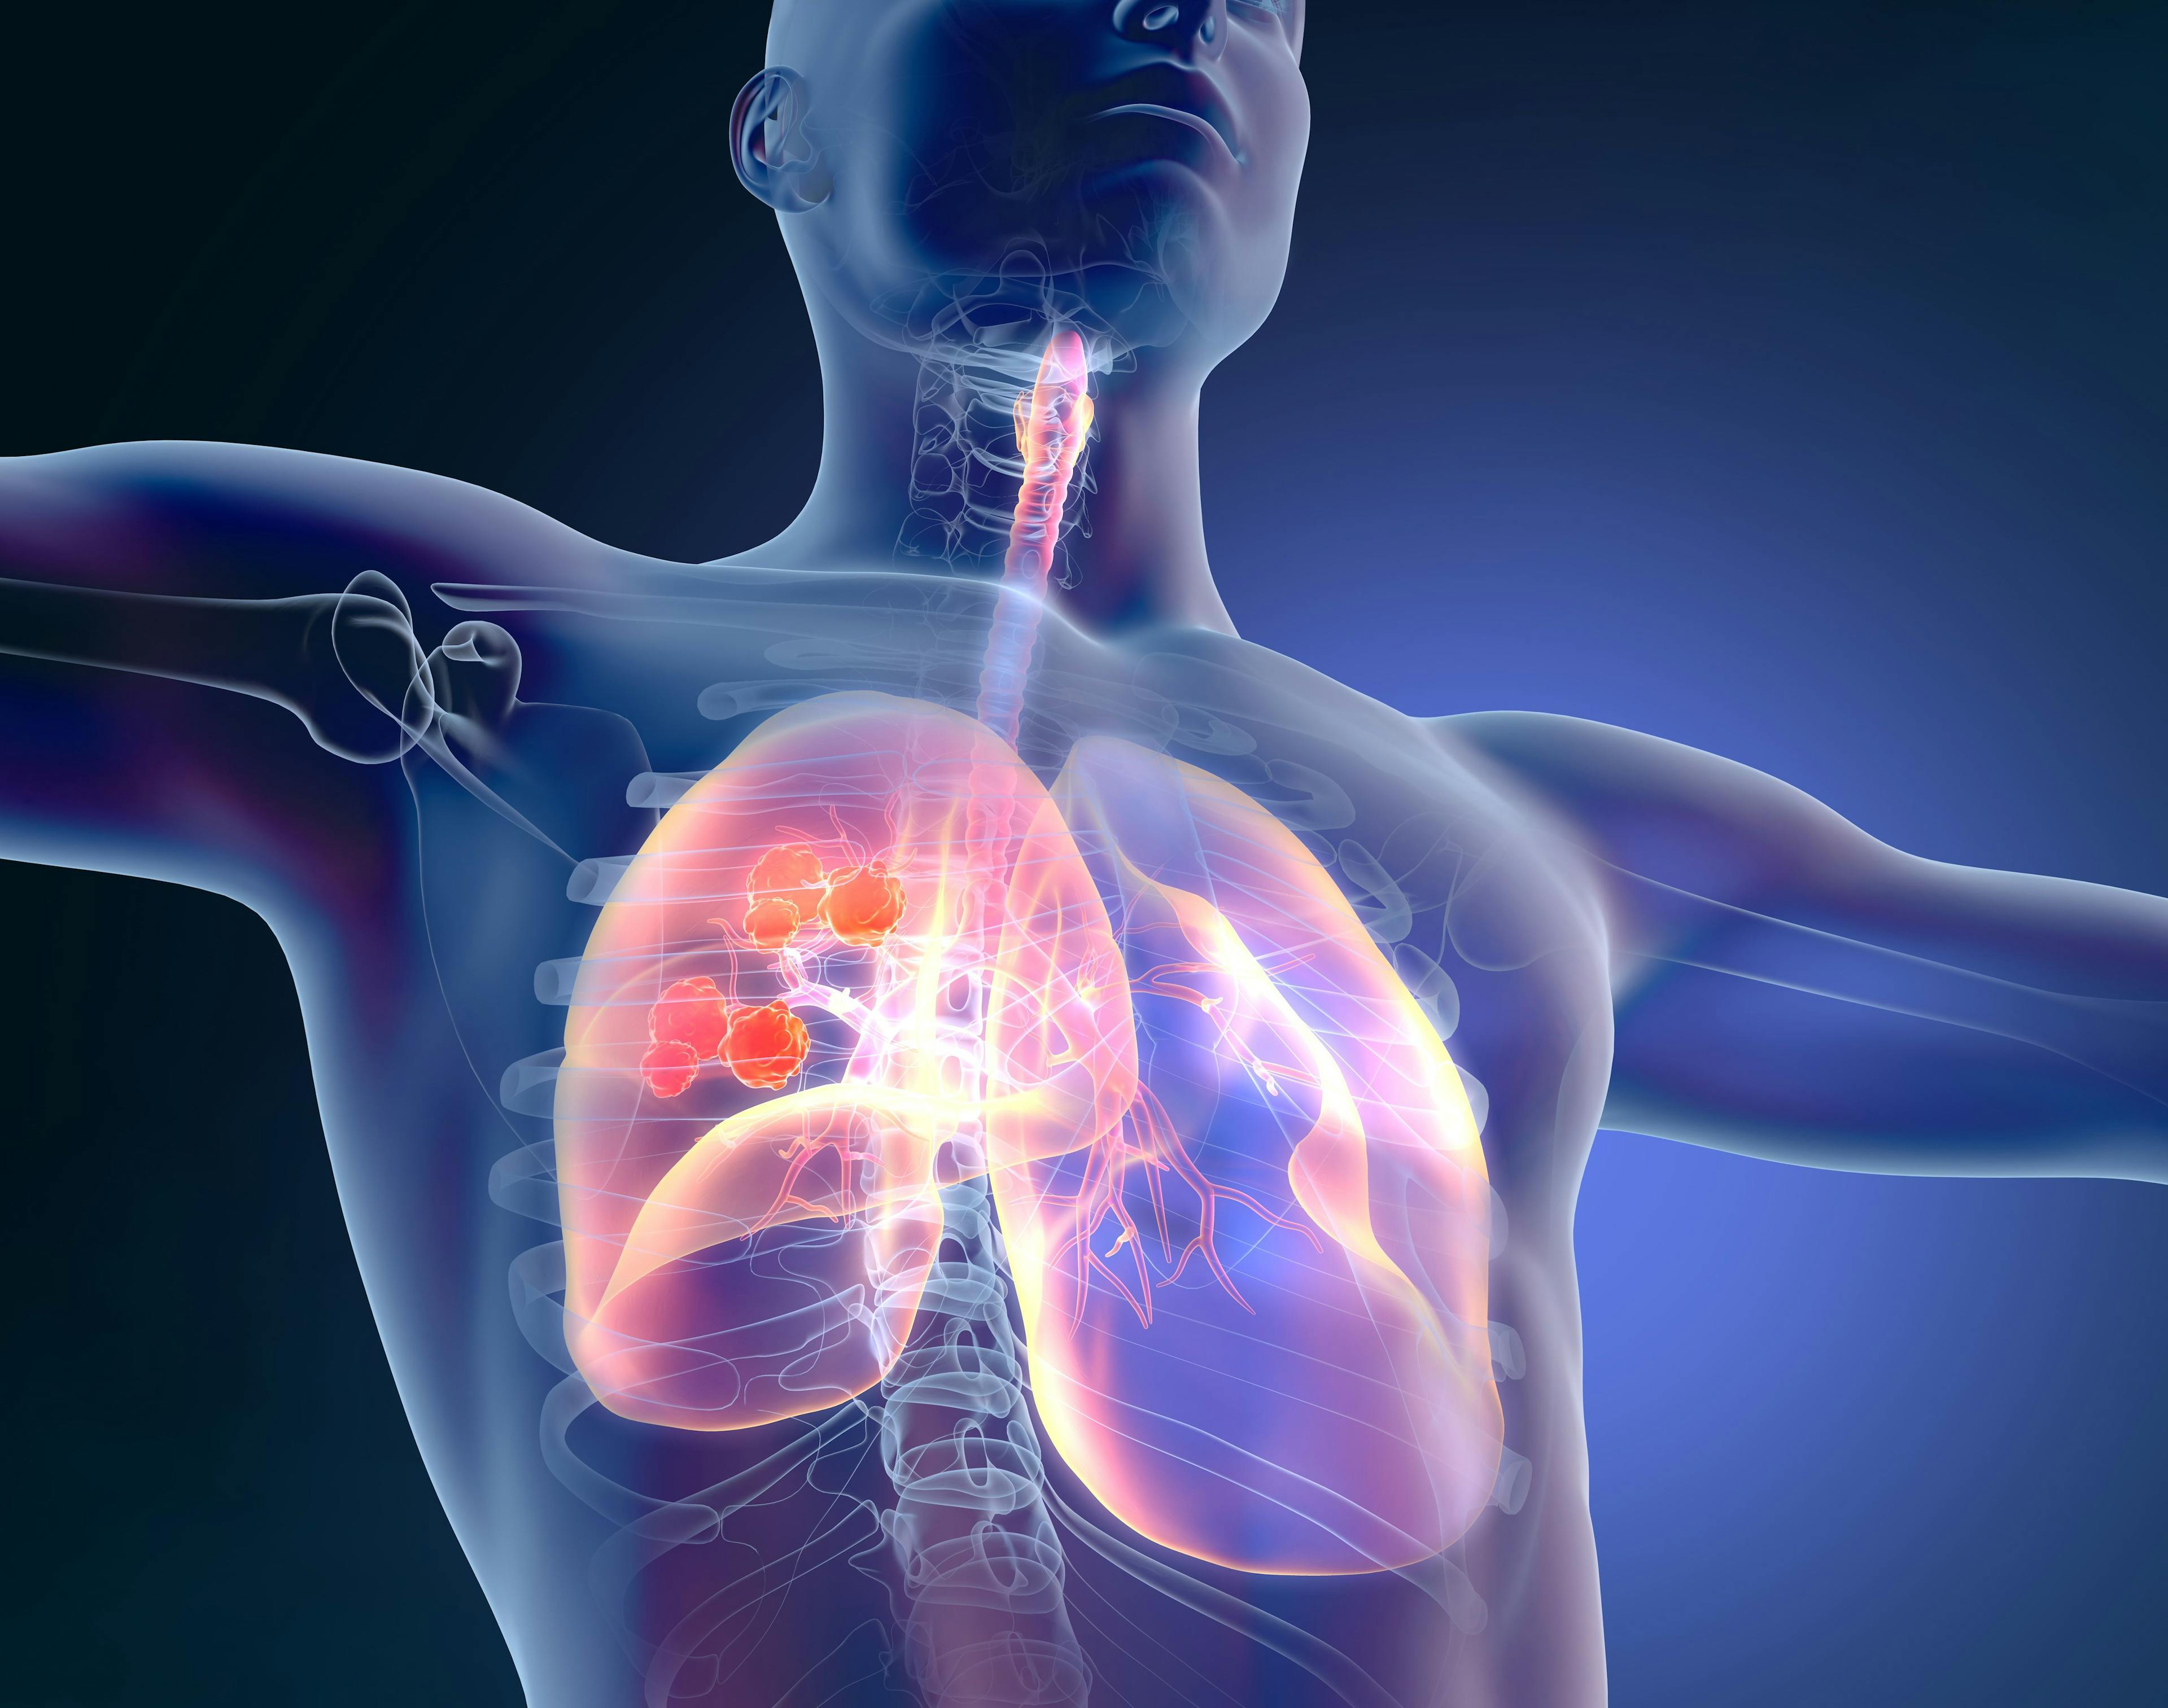 Decreased Rates of Lung Cancer Screening Highlight Need for Greater Awareness